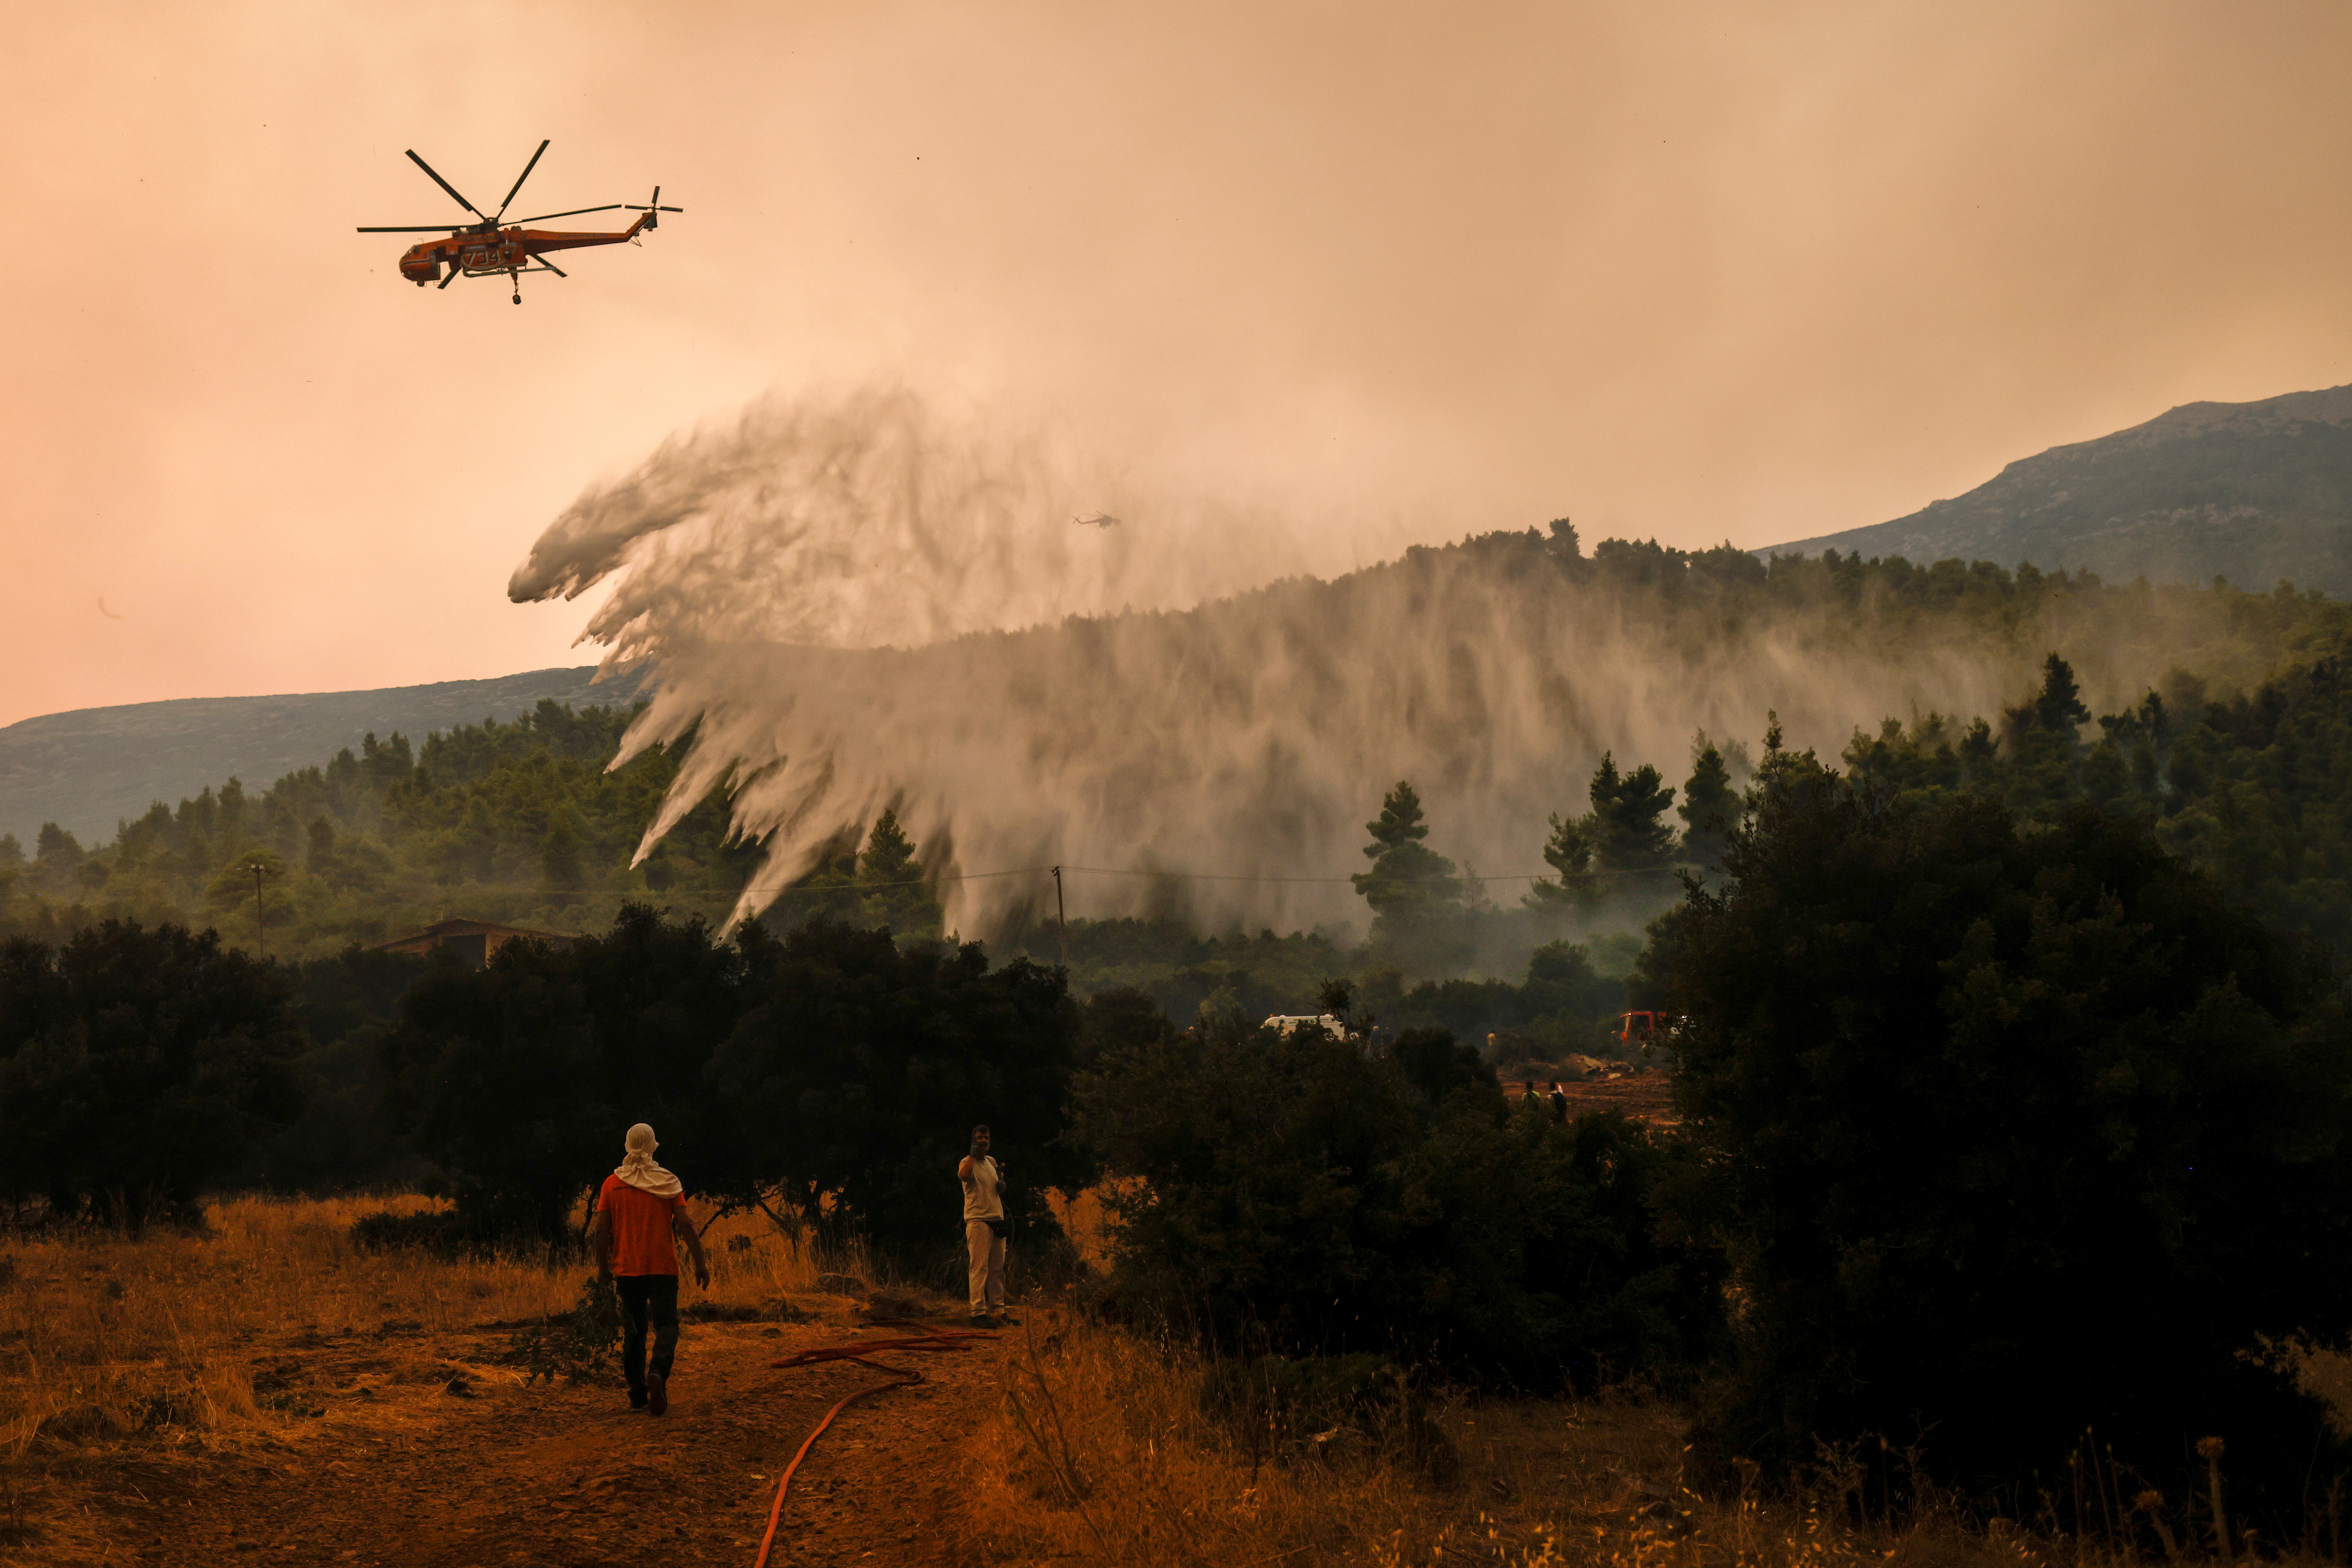 A firefighting helicopter makes a water drop as a wildfire burns in the village of Vilia, Greece, August 18, 2021. REUTERS/Alkis Konstantinidis